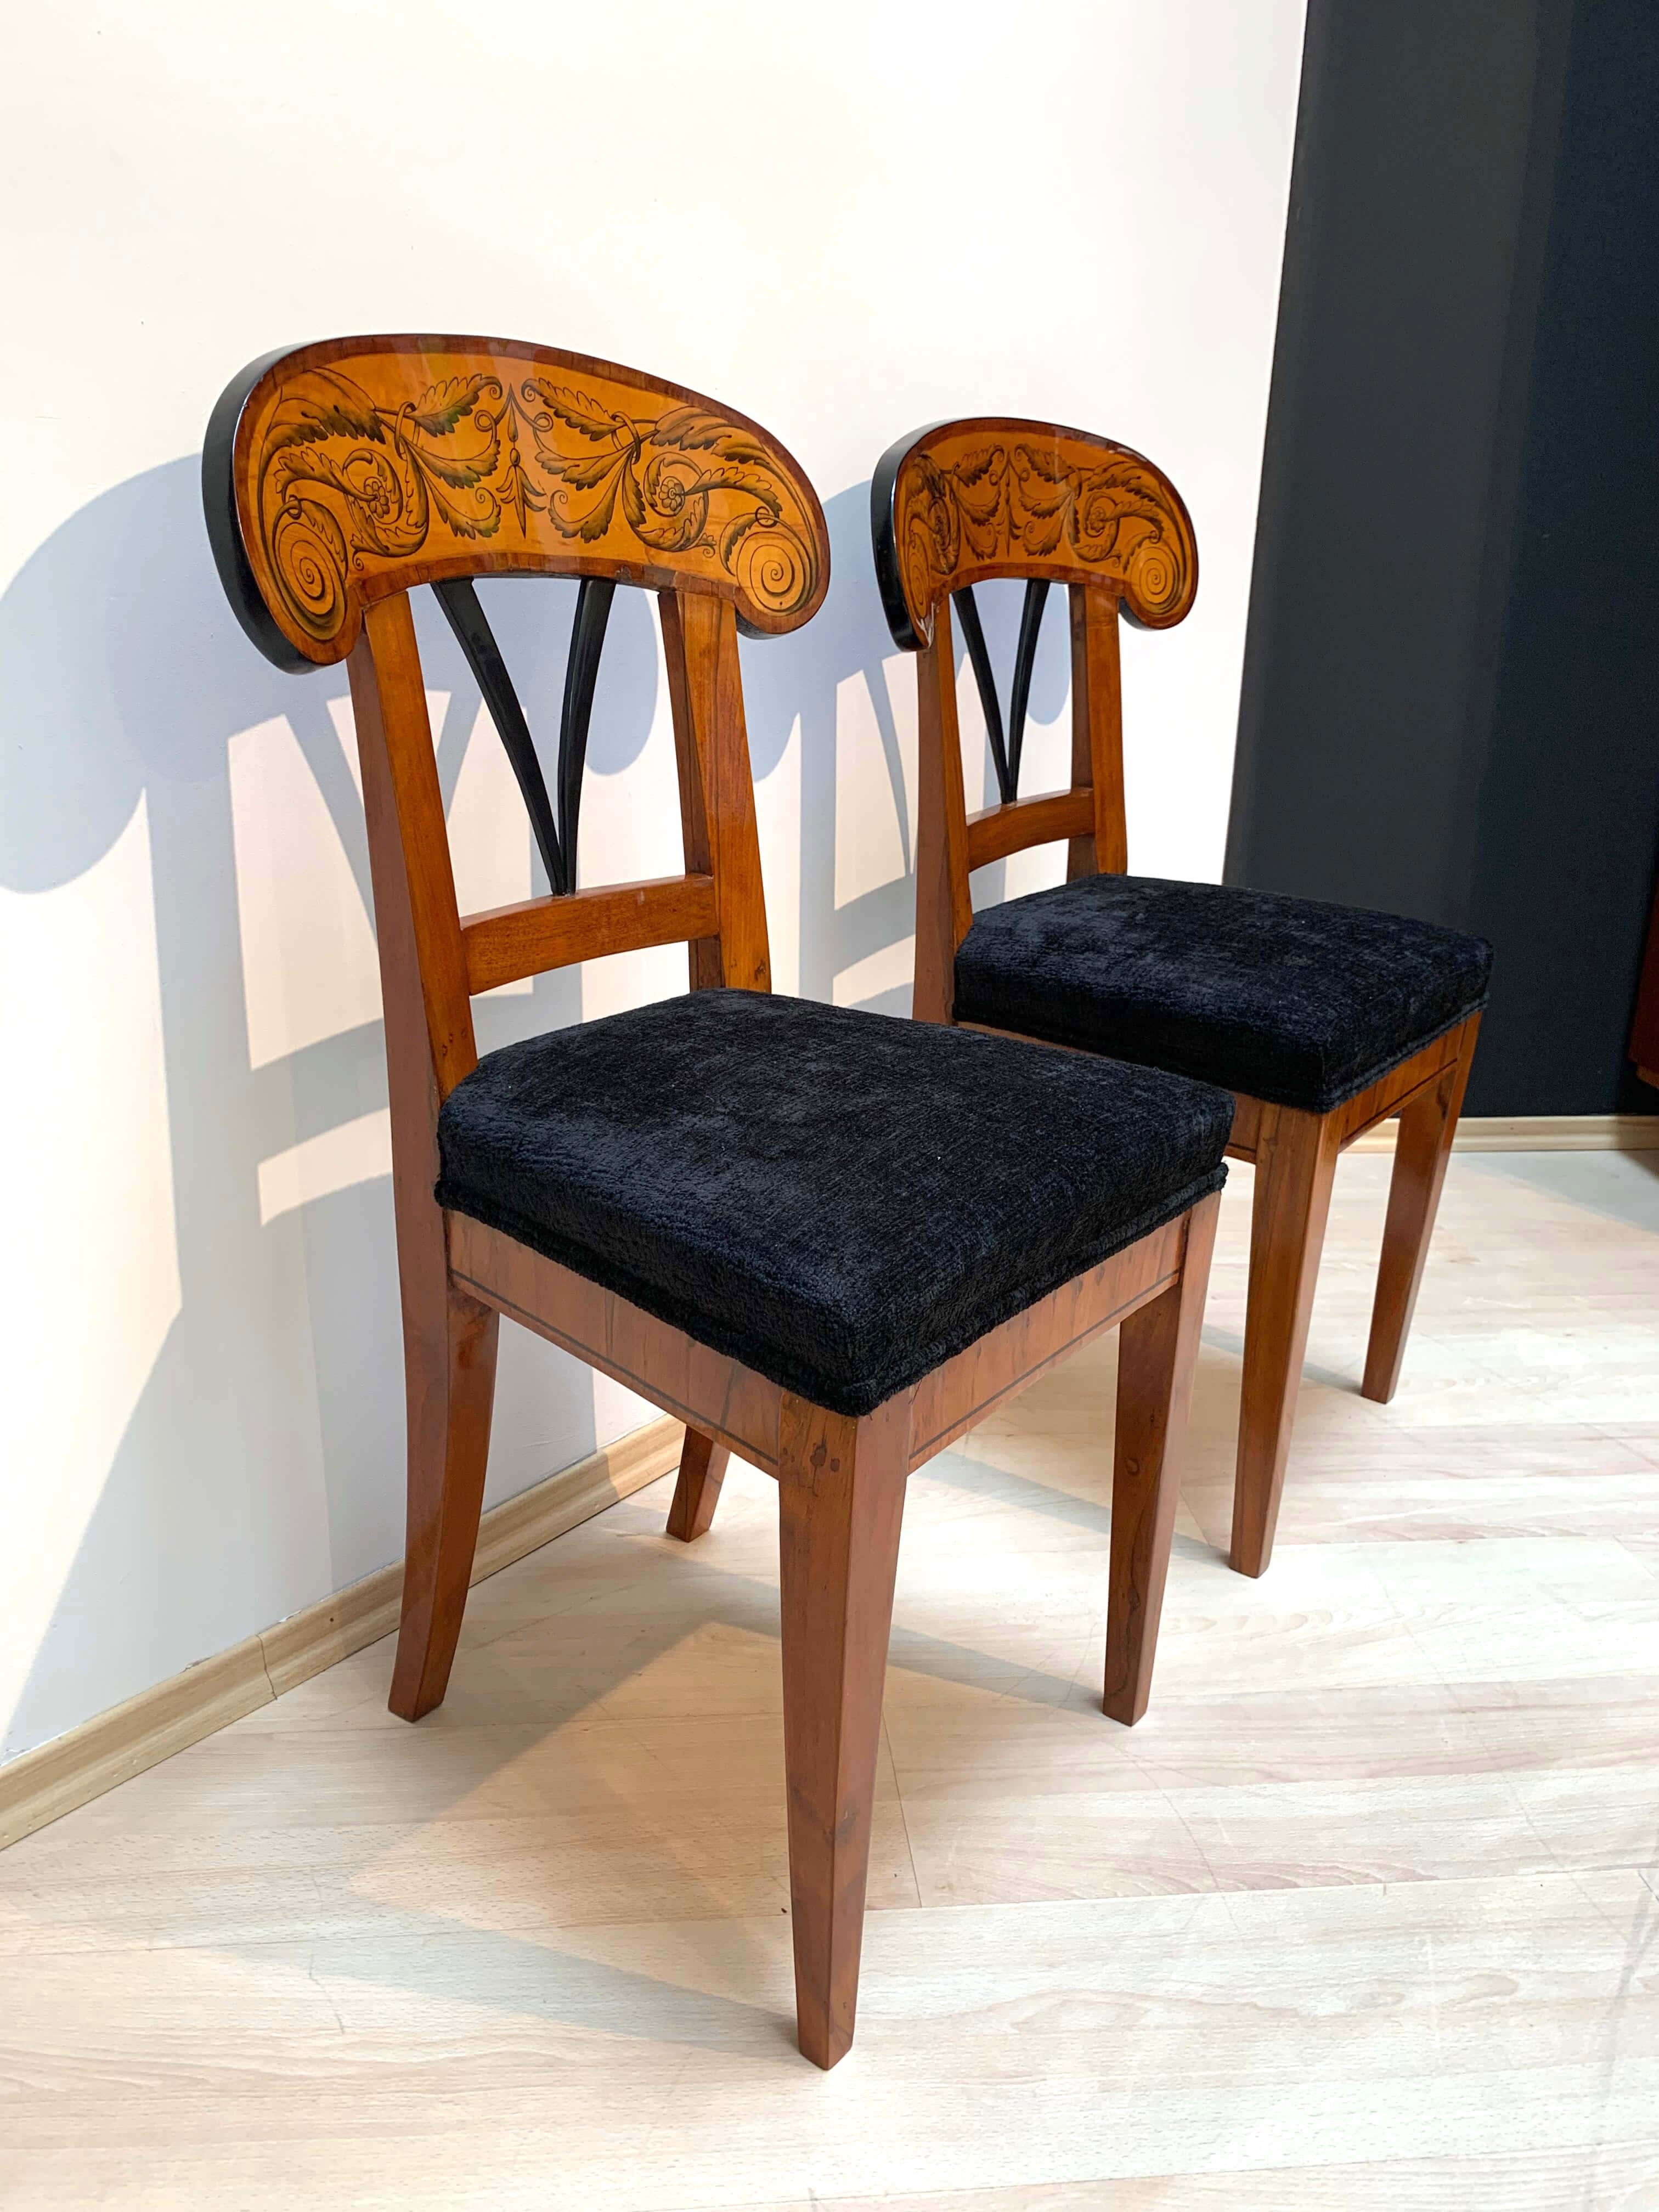 Early 19th Century Pair of Biedermeier Shovel Chairs with Ink Painting, Walnut, South German, 1830s For Sale